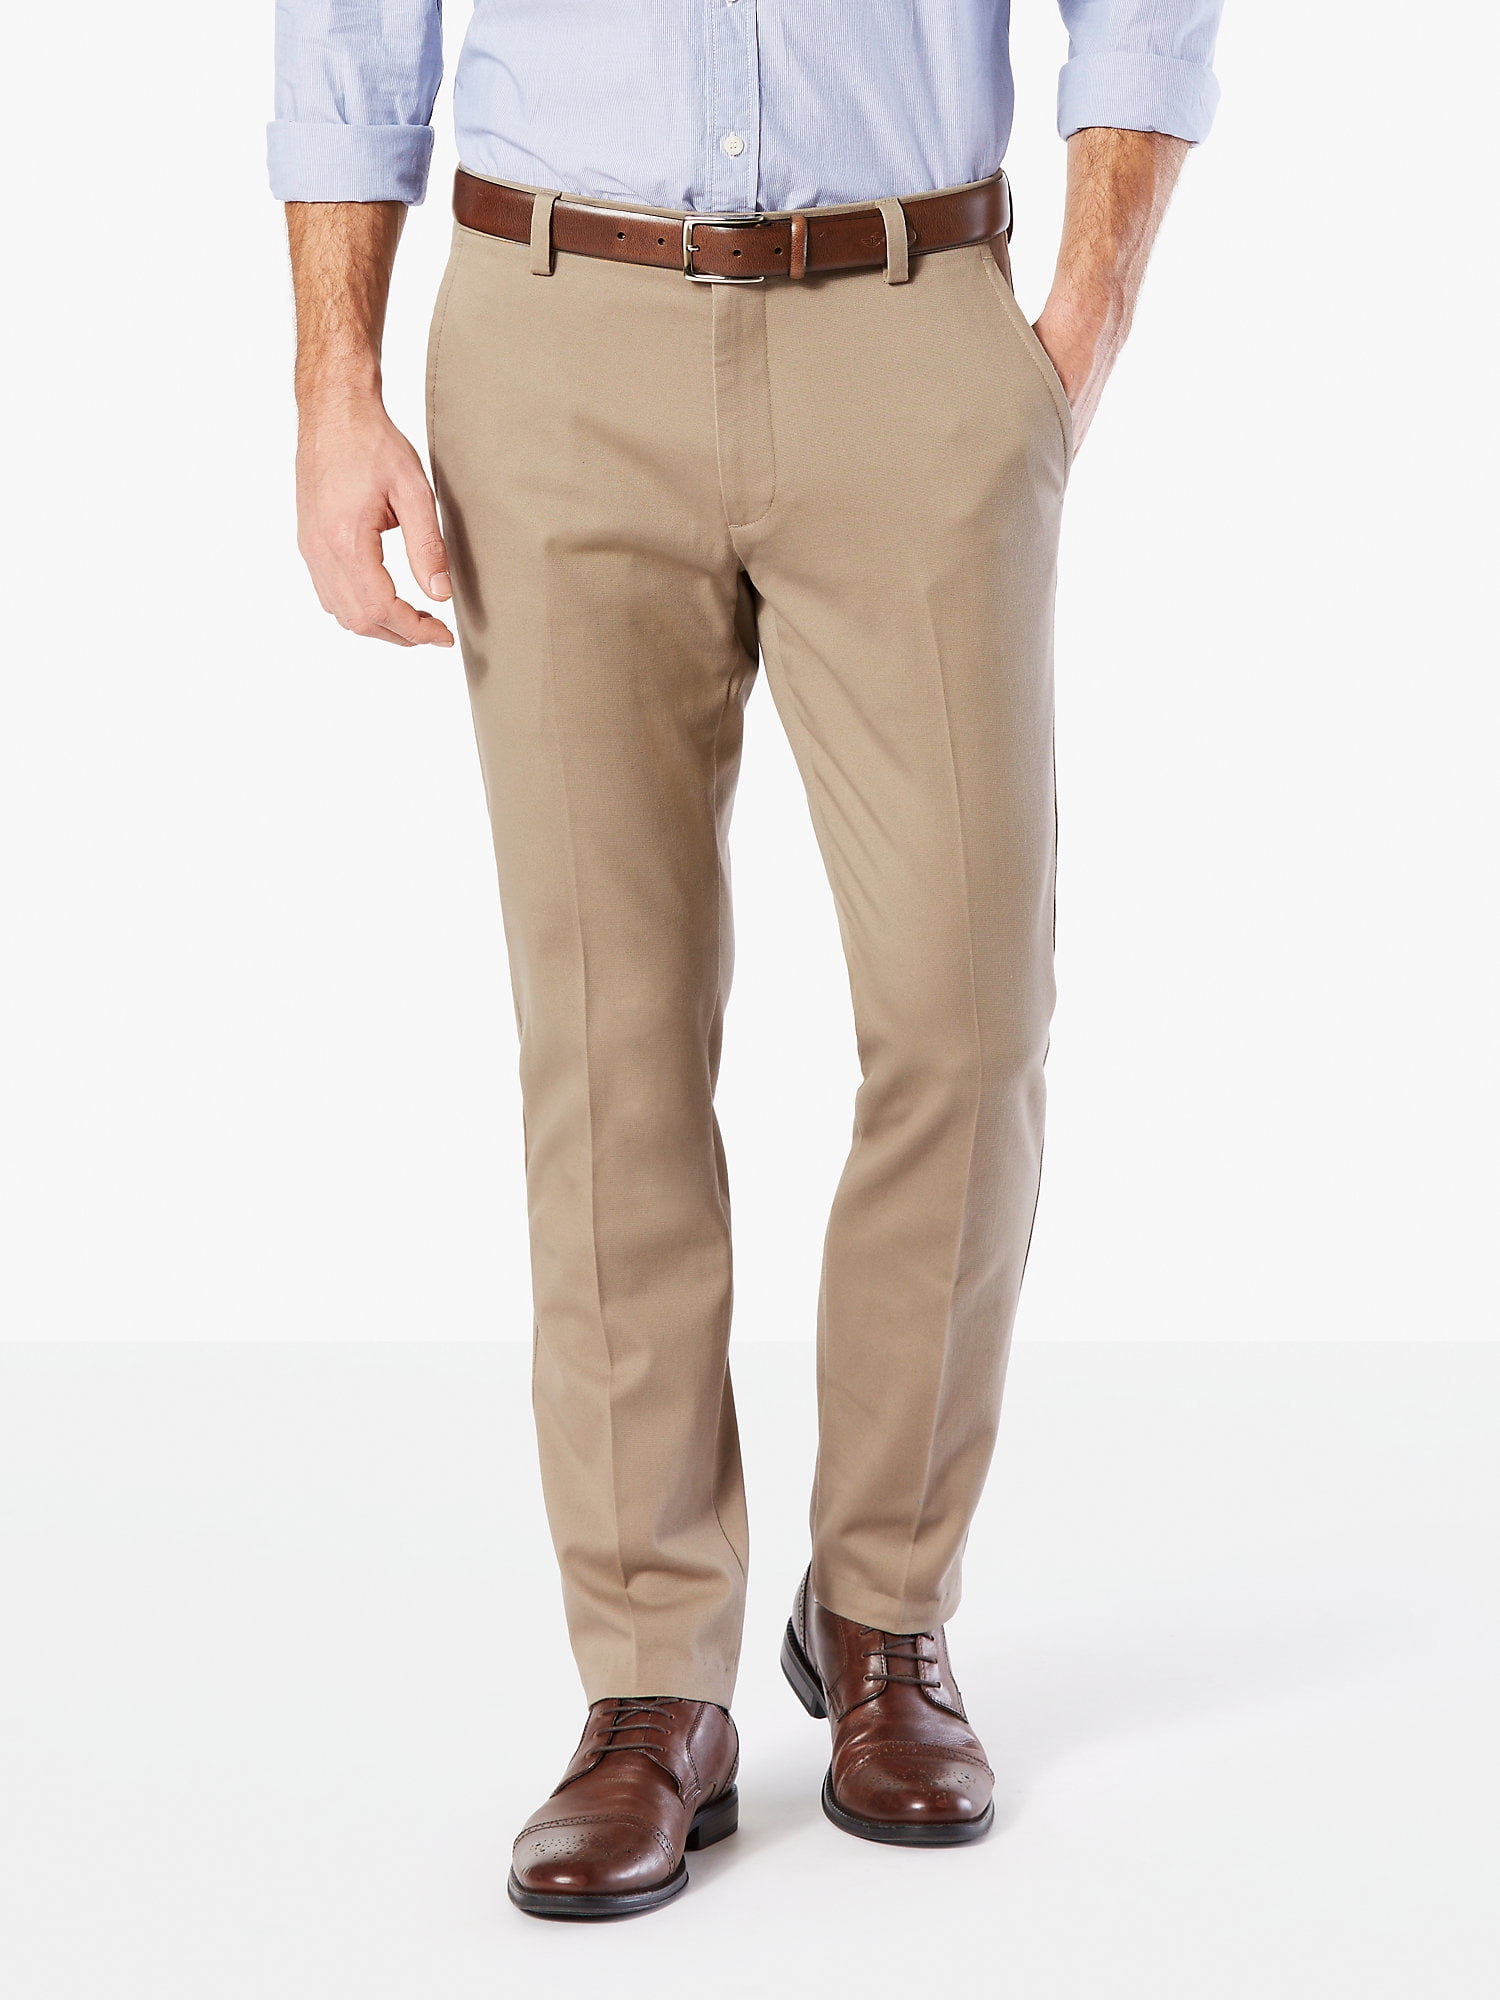 Dockers Men's Slim Tapered Easy Khaki Pants with Stretch 